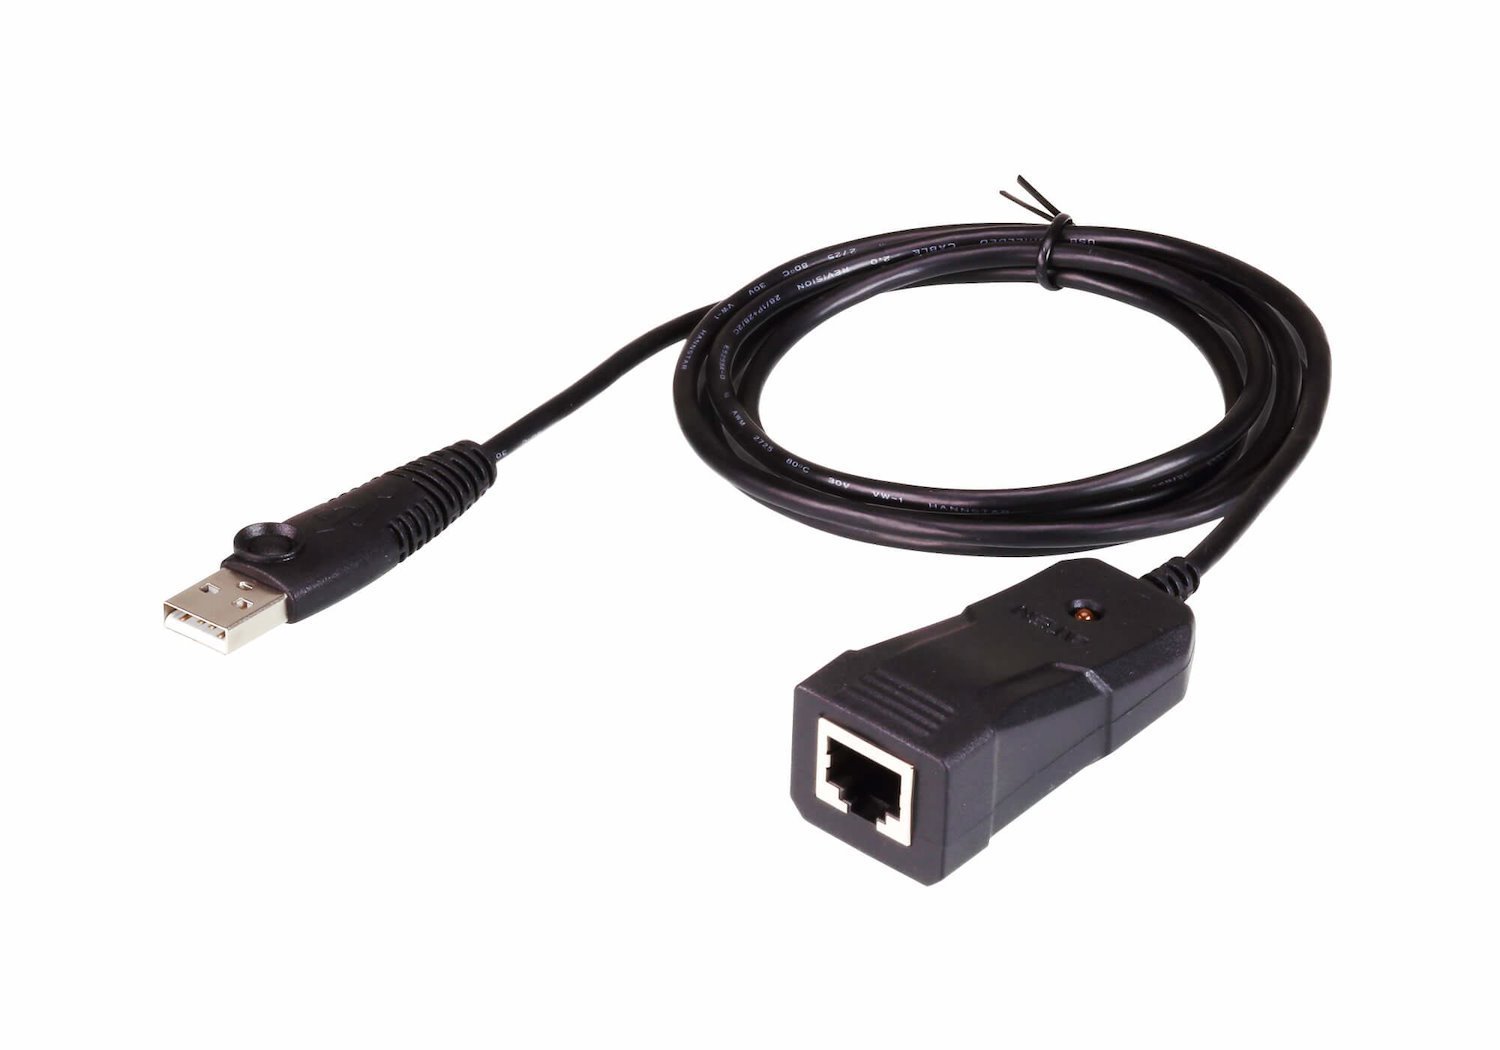 Aten Usb To RS-232 Console Adapter[1.2M] (Usb To RS-232 Console Adapter - [1.2M] - Warranty: 24M)